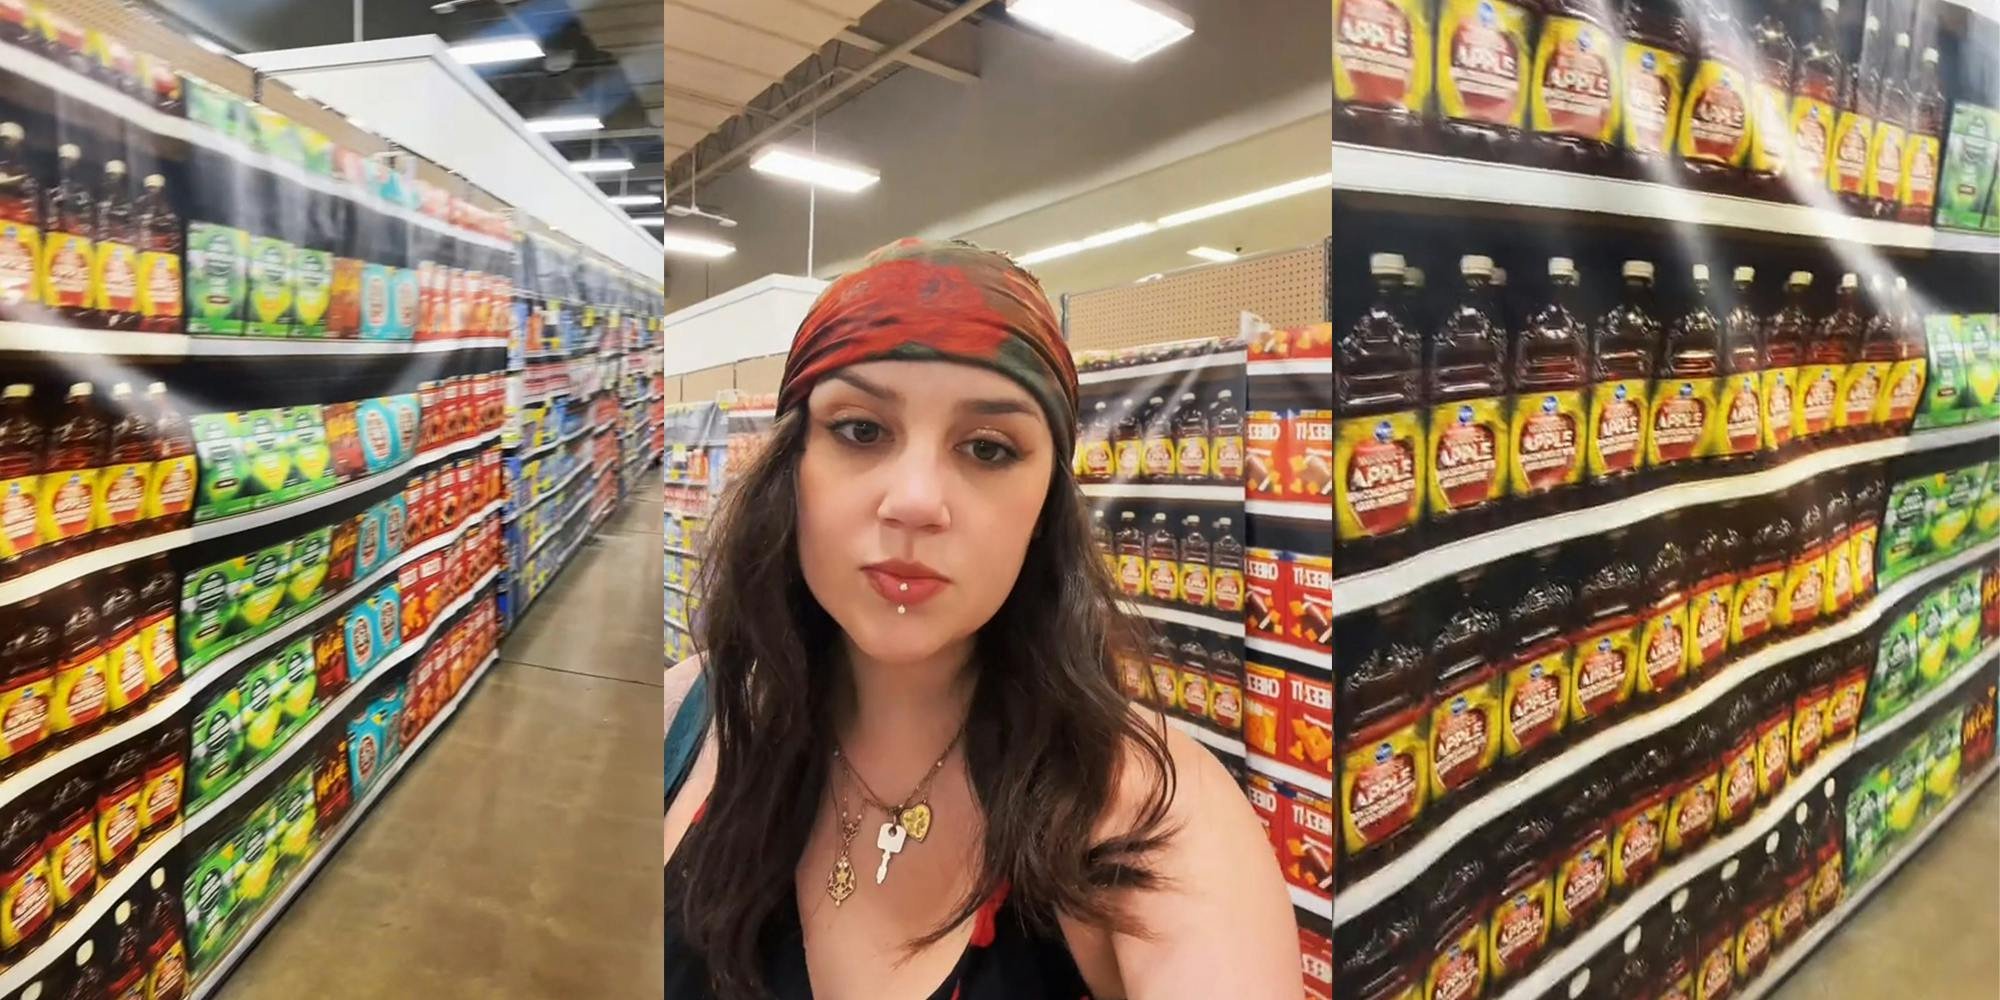 'Just when you thought grocery shopping couldn't get any worse': Shopper finds empty shelves covered with printed photos of food at grocery store